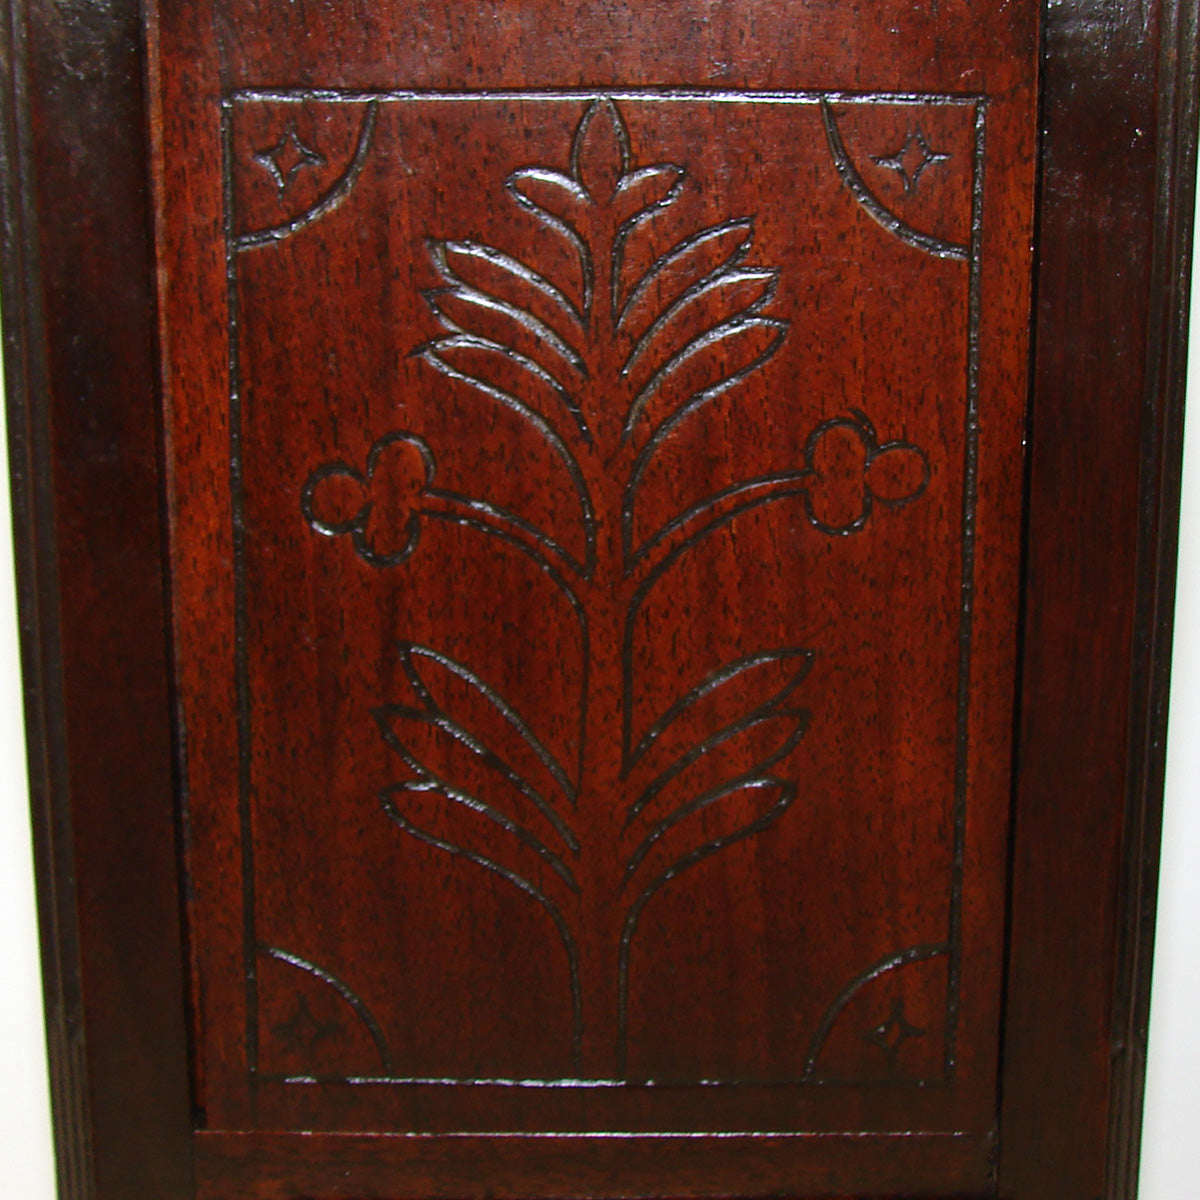 Antique 19th c. French Salt Box, Cabinet, 17 5/8" Tall, Hand Carved Country French